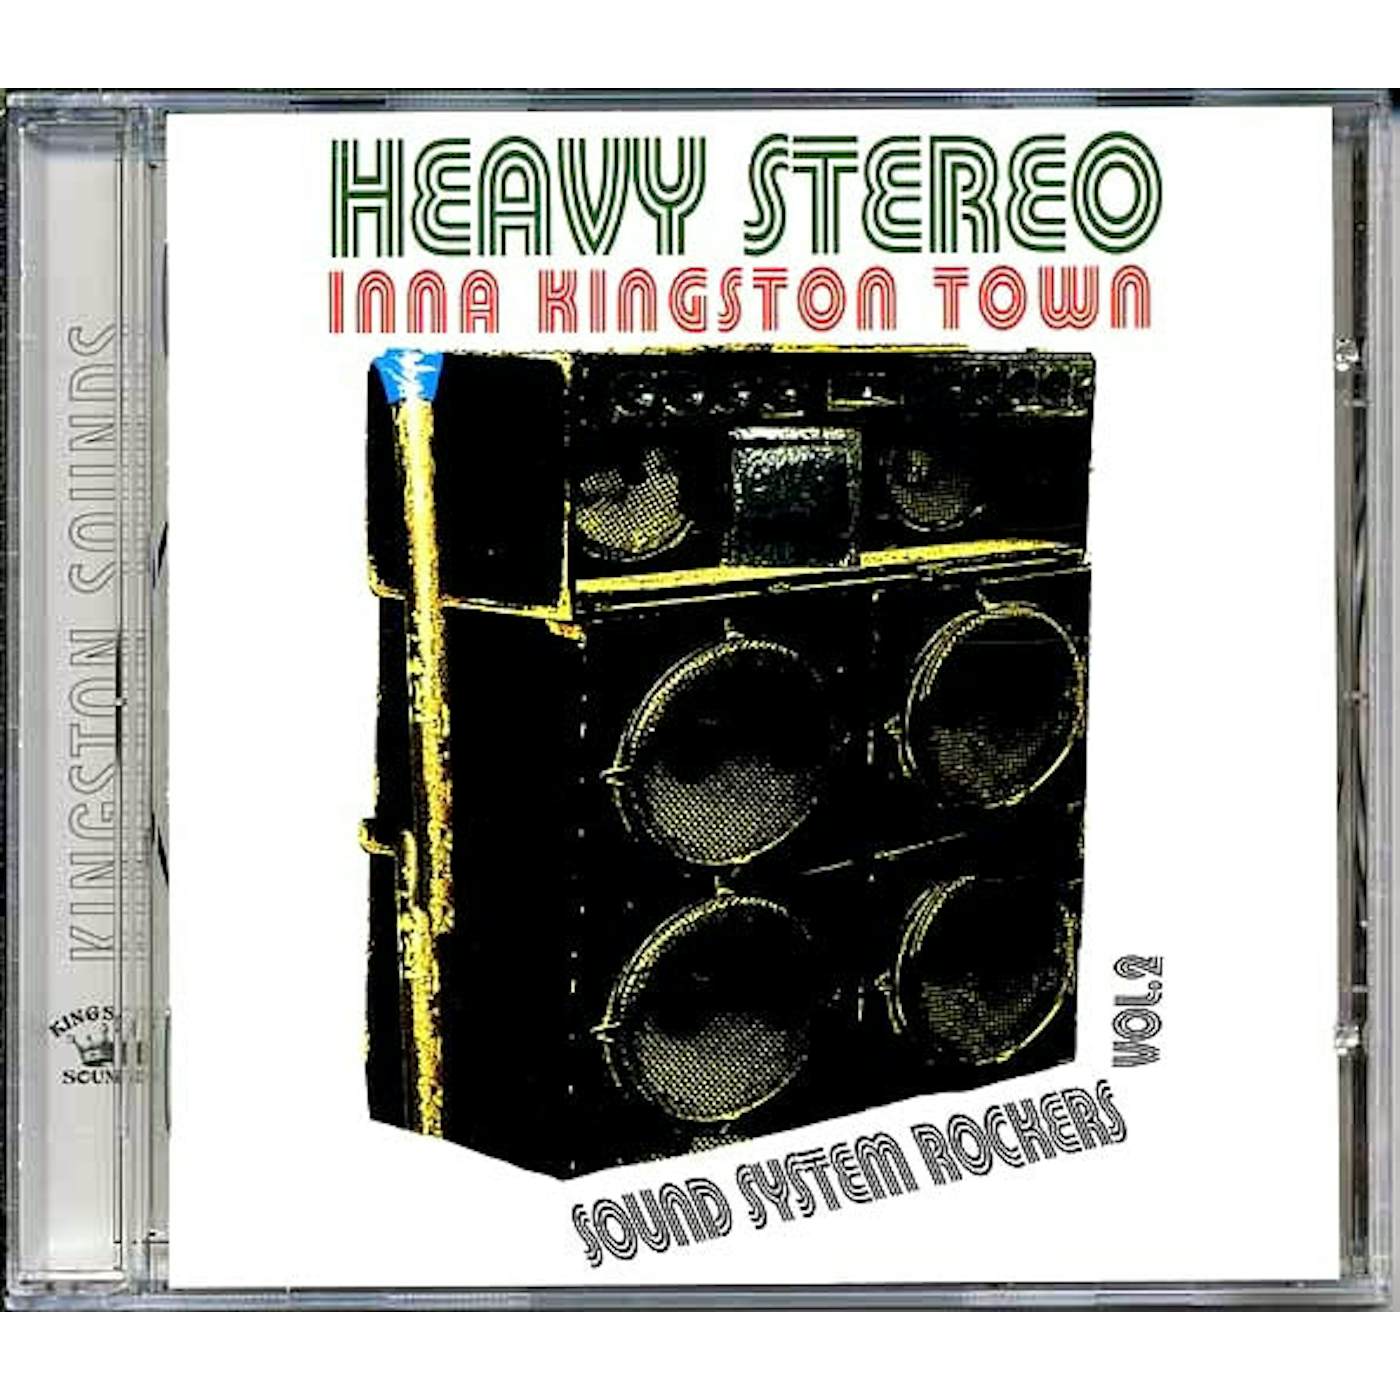 Leroy Smart, Barry Brown, Cornell Campbell, Etc.  CD -  Sound System Rockers Volume 2: Heavy Stereo Inna Kingston Town